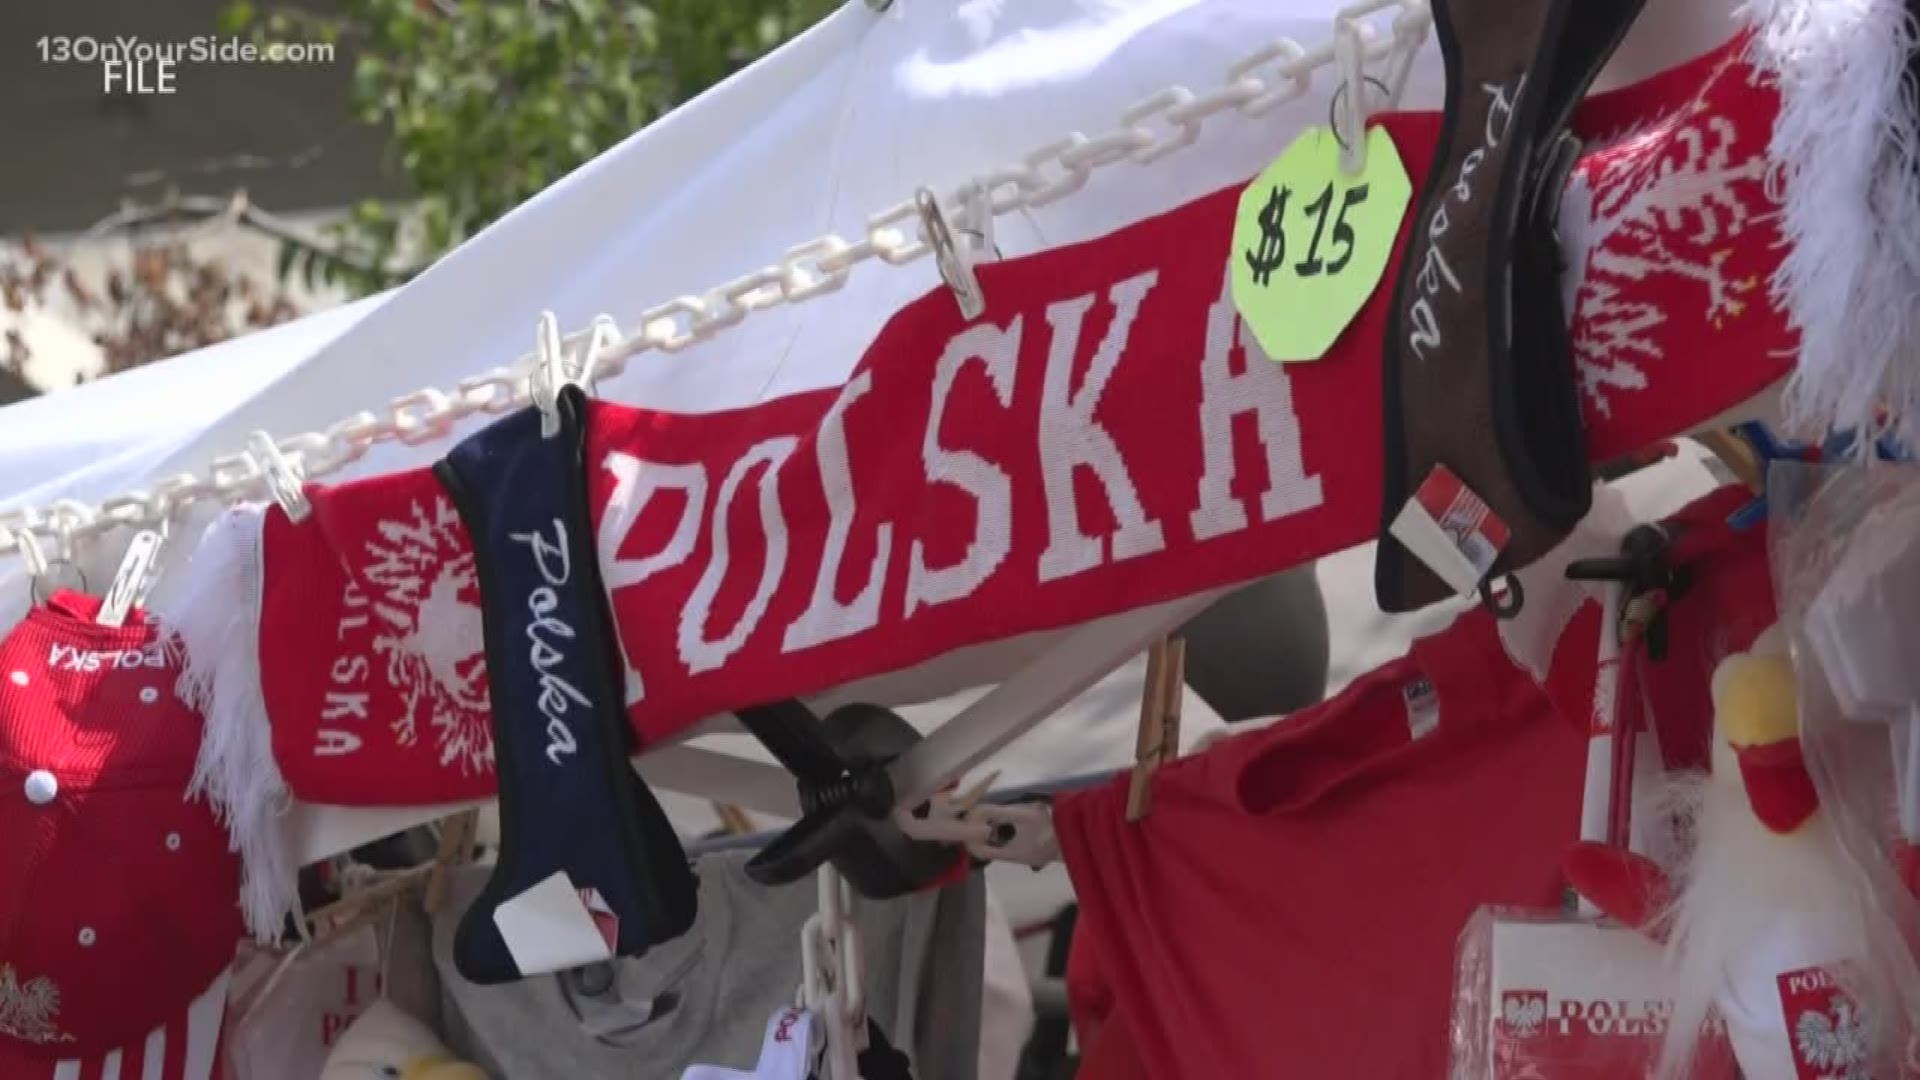 The free event is showcasing authentic Polish food, music and more! Those interested can stop by Calder Plaza until 5 p.m. Sunday to check it out.